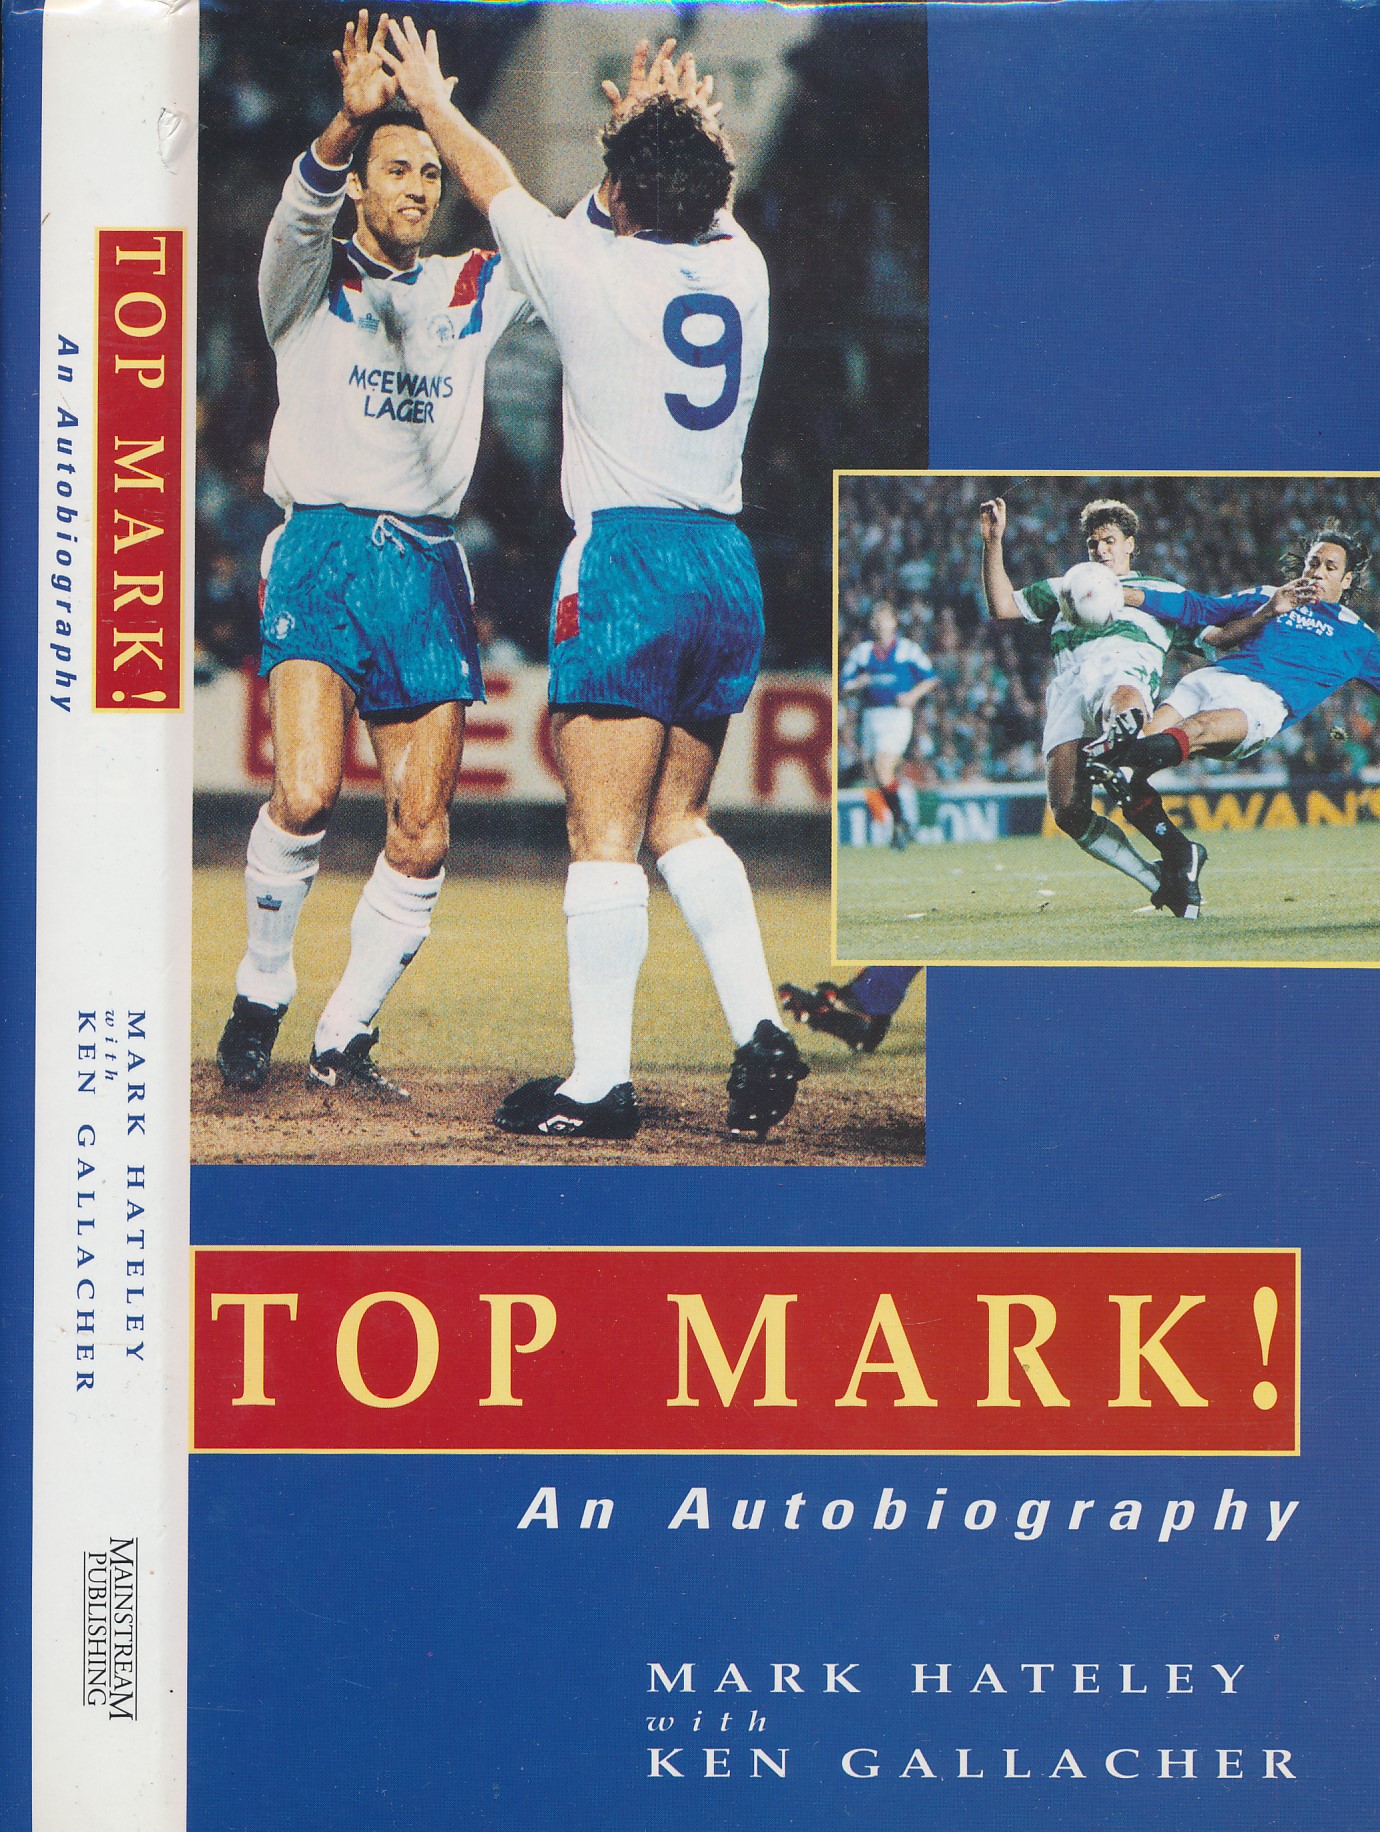 Top Mark! An Autobiography. Signed copy.